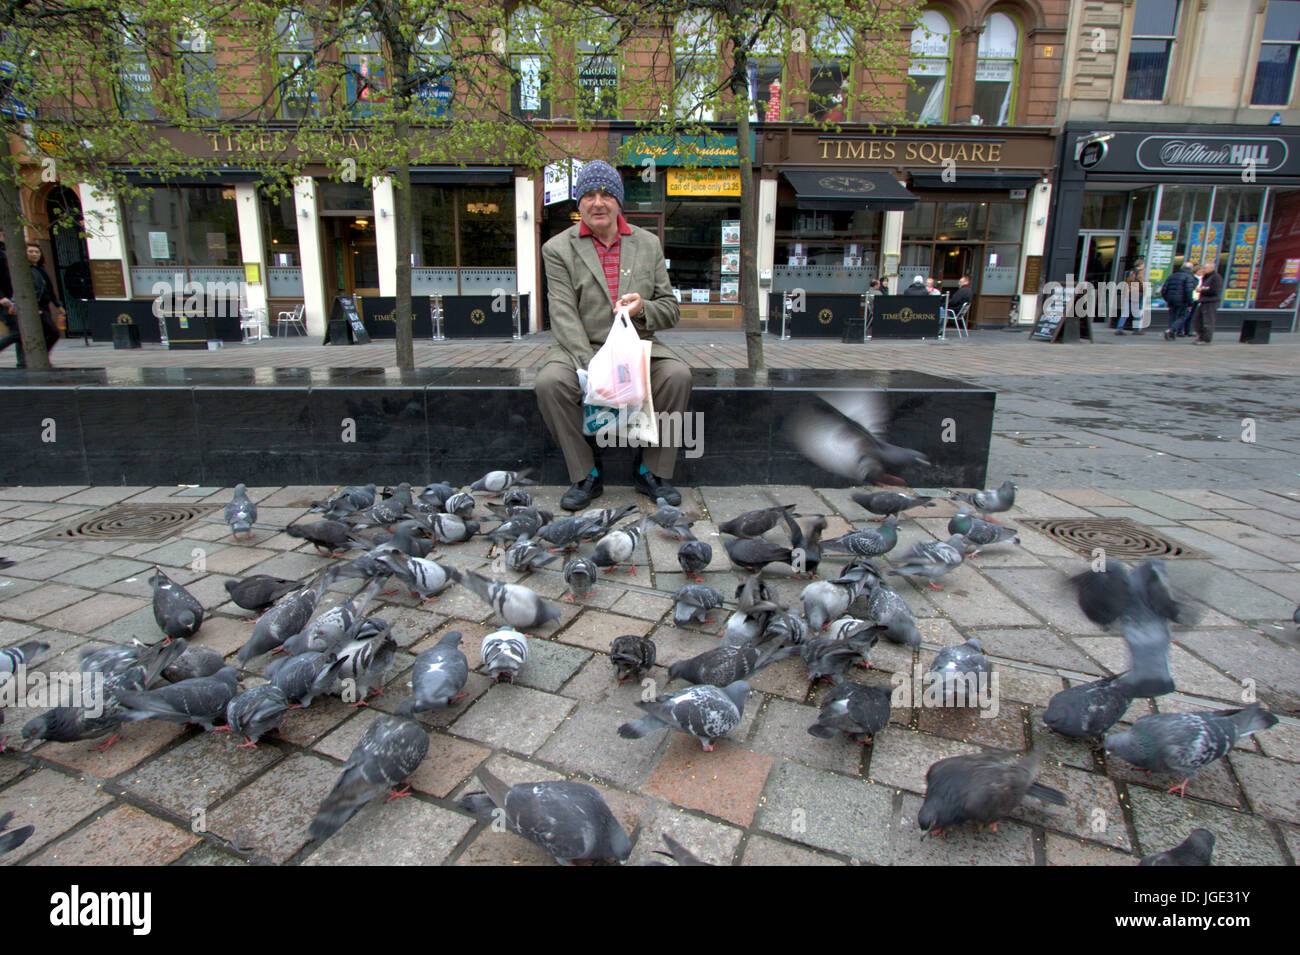 old man alone quirky dressed feeding pigeons in a square sitting on a bench in Glasgow Stock Photo